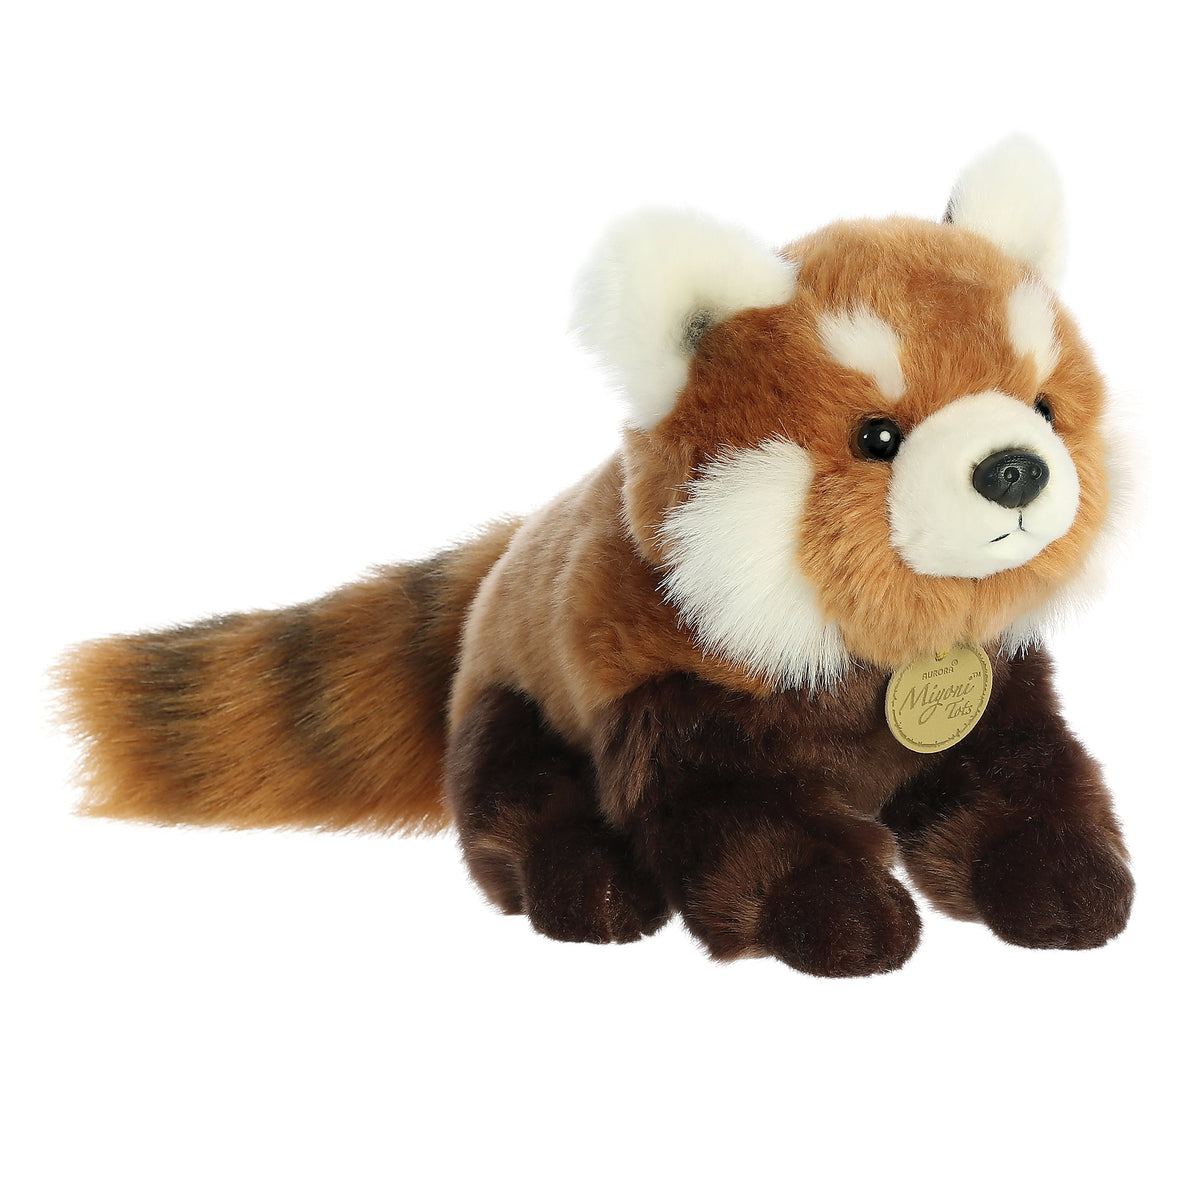 Red Panda Cub plush with golden red fur, dark brown legs, and charming white facial accents while having a realistic nose!